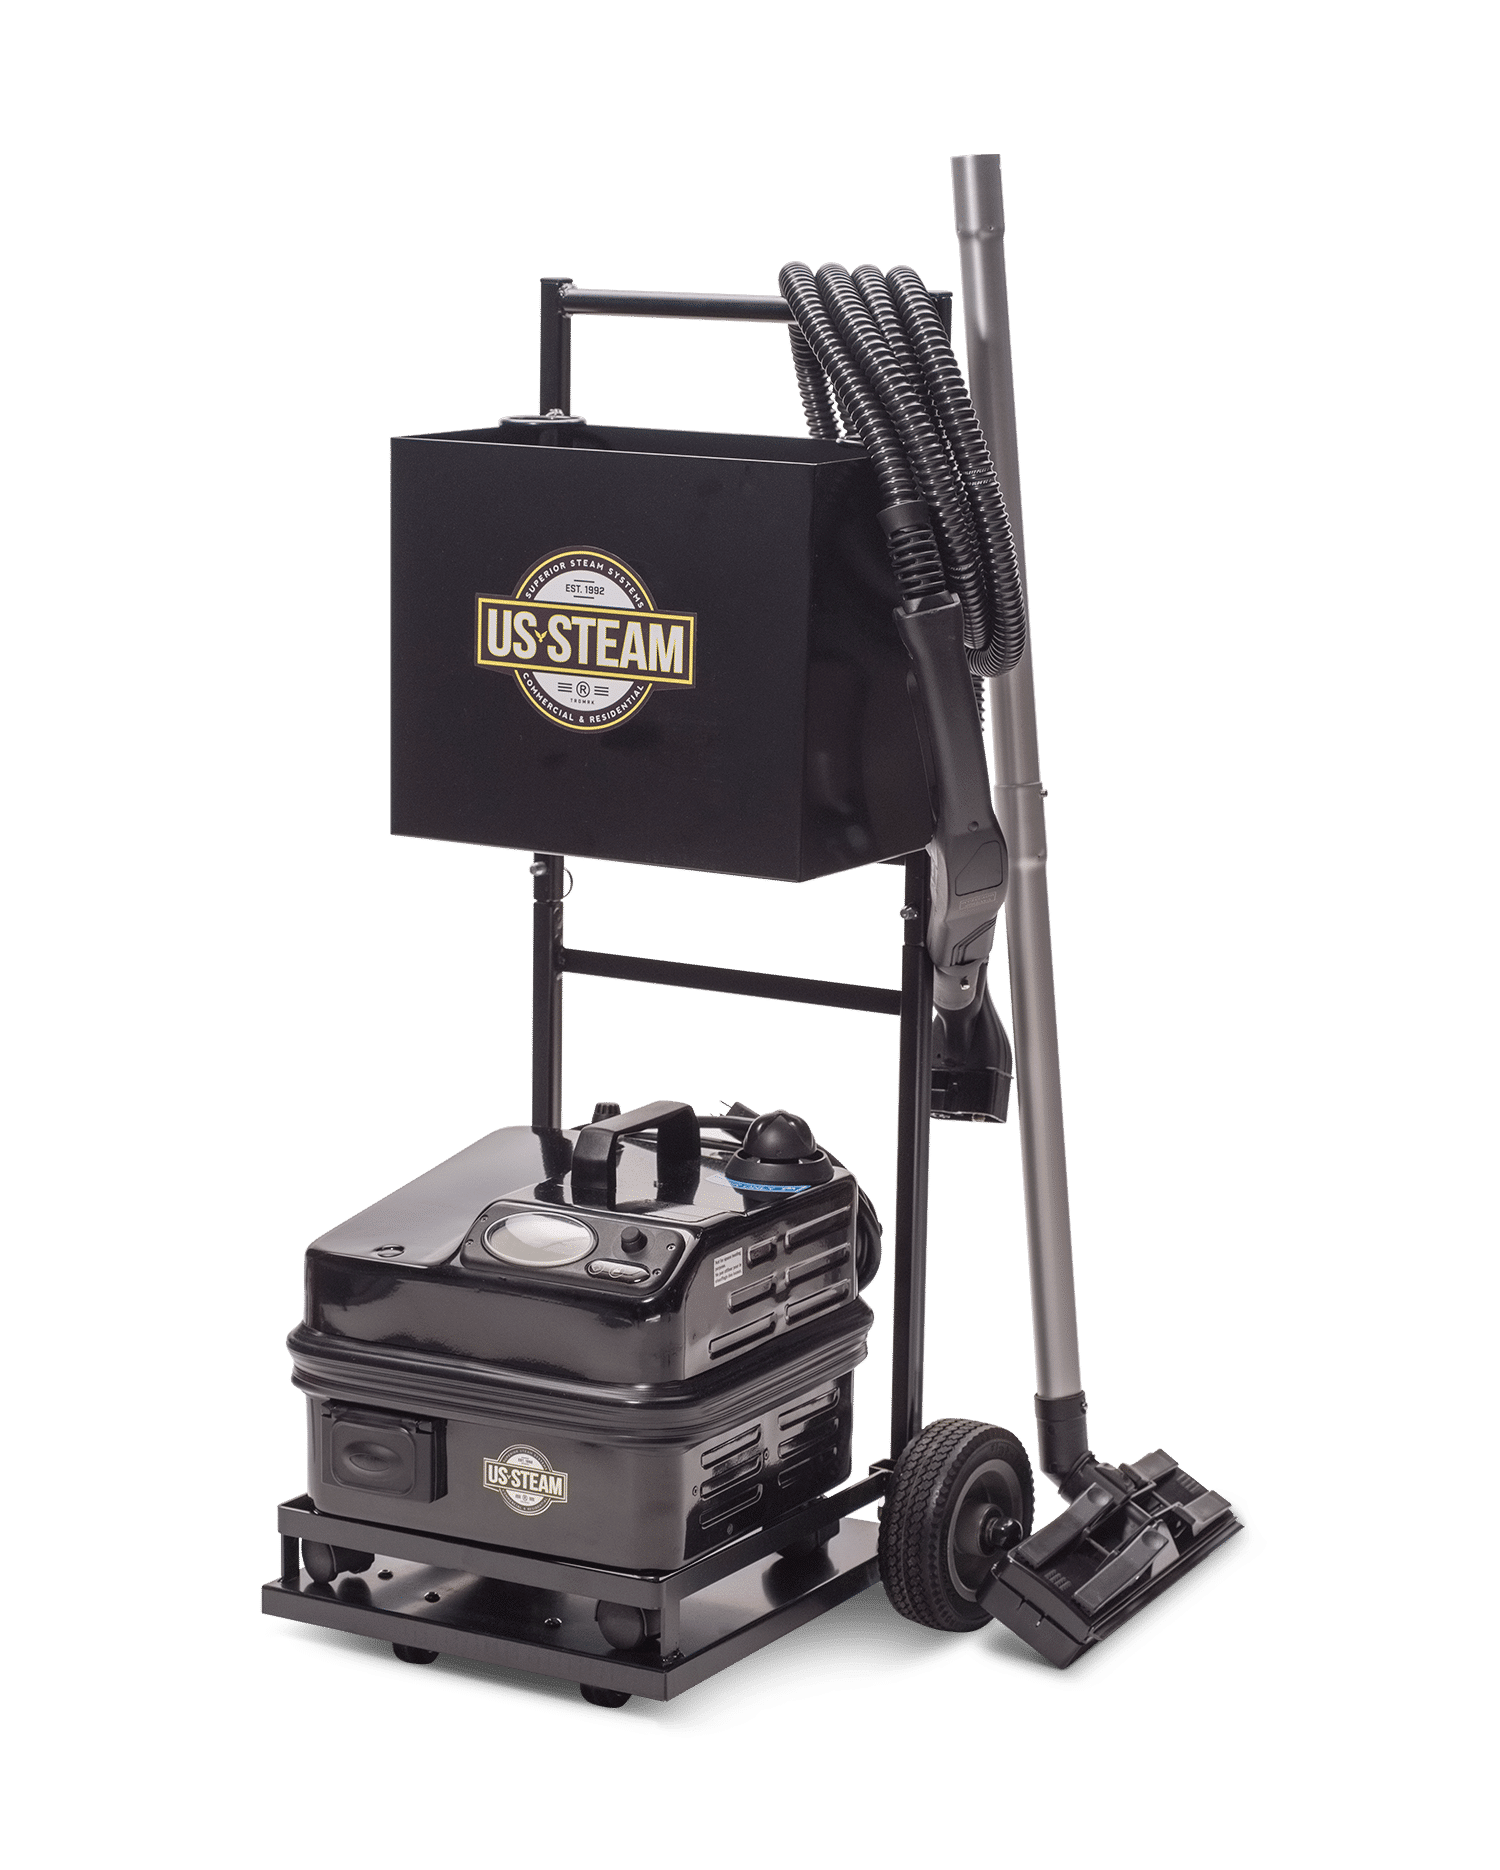 Hot Pressure Washer - Portable - Tool Rental Depot Store